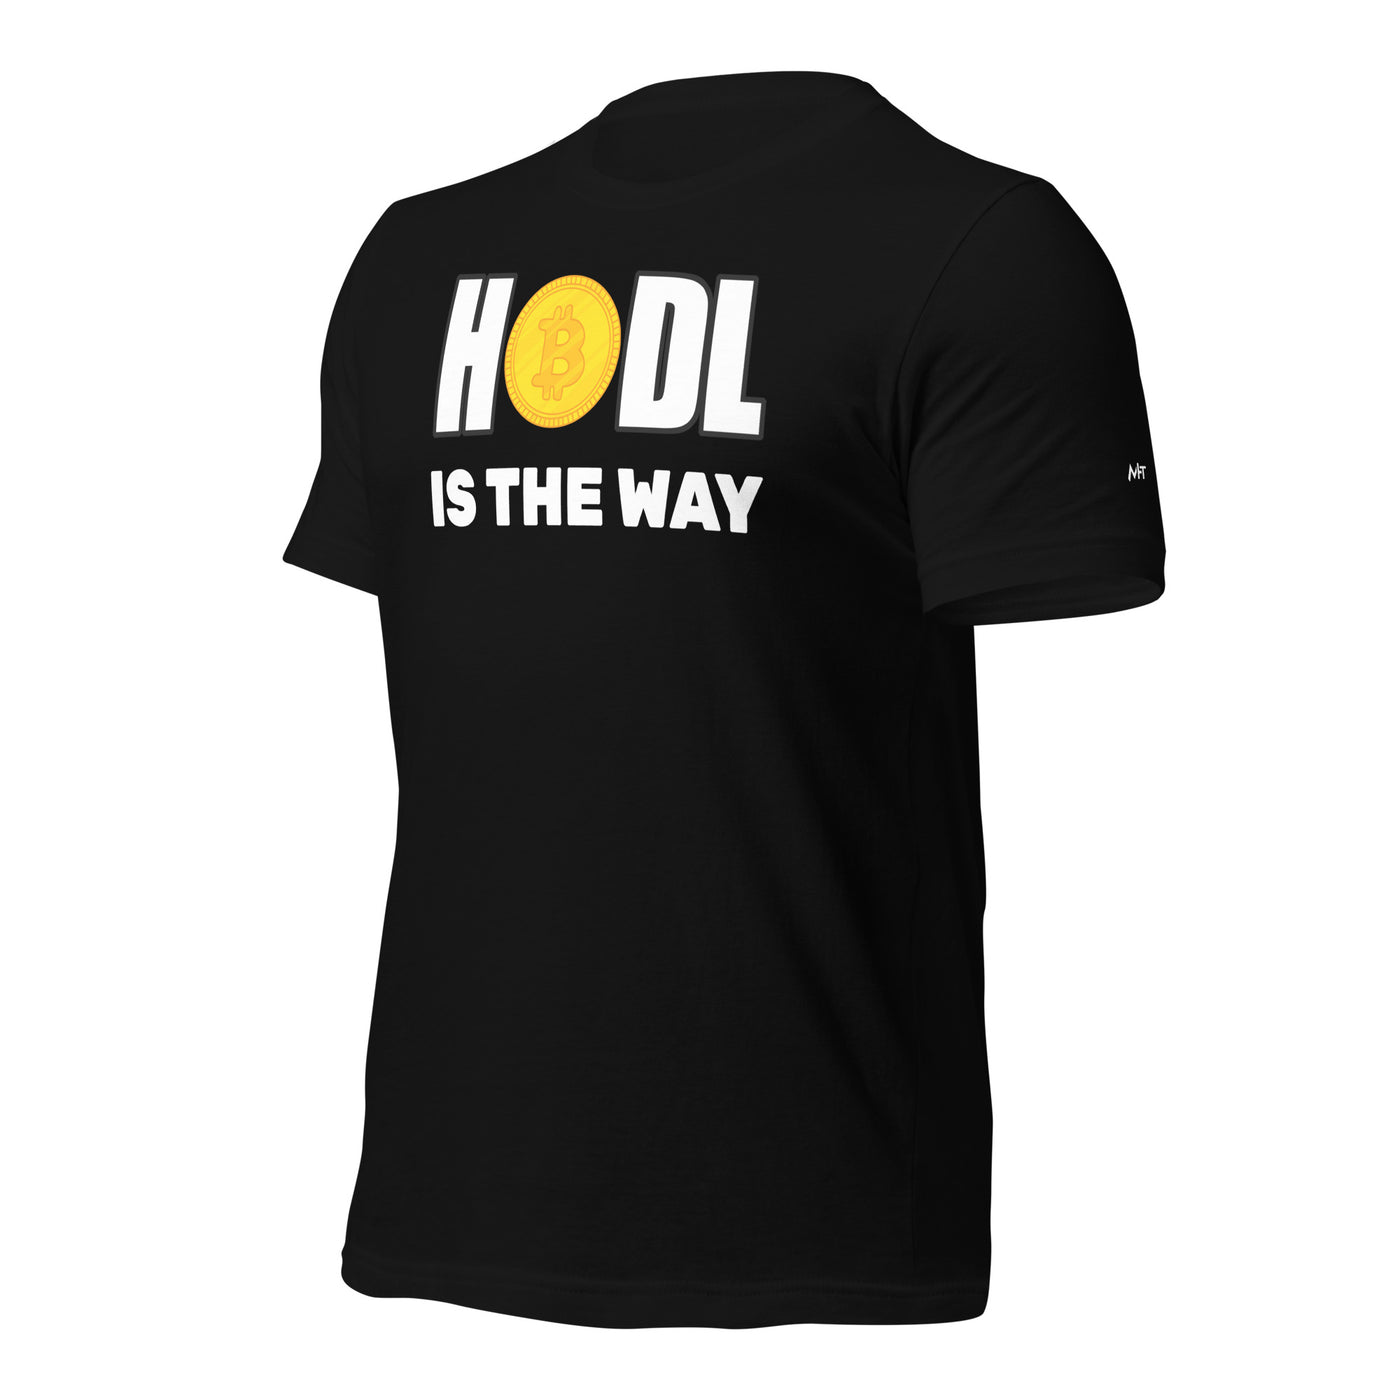 Hodl is the way - Unisex t-shirt